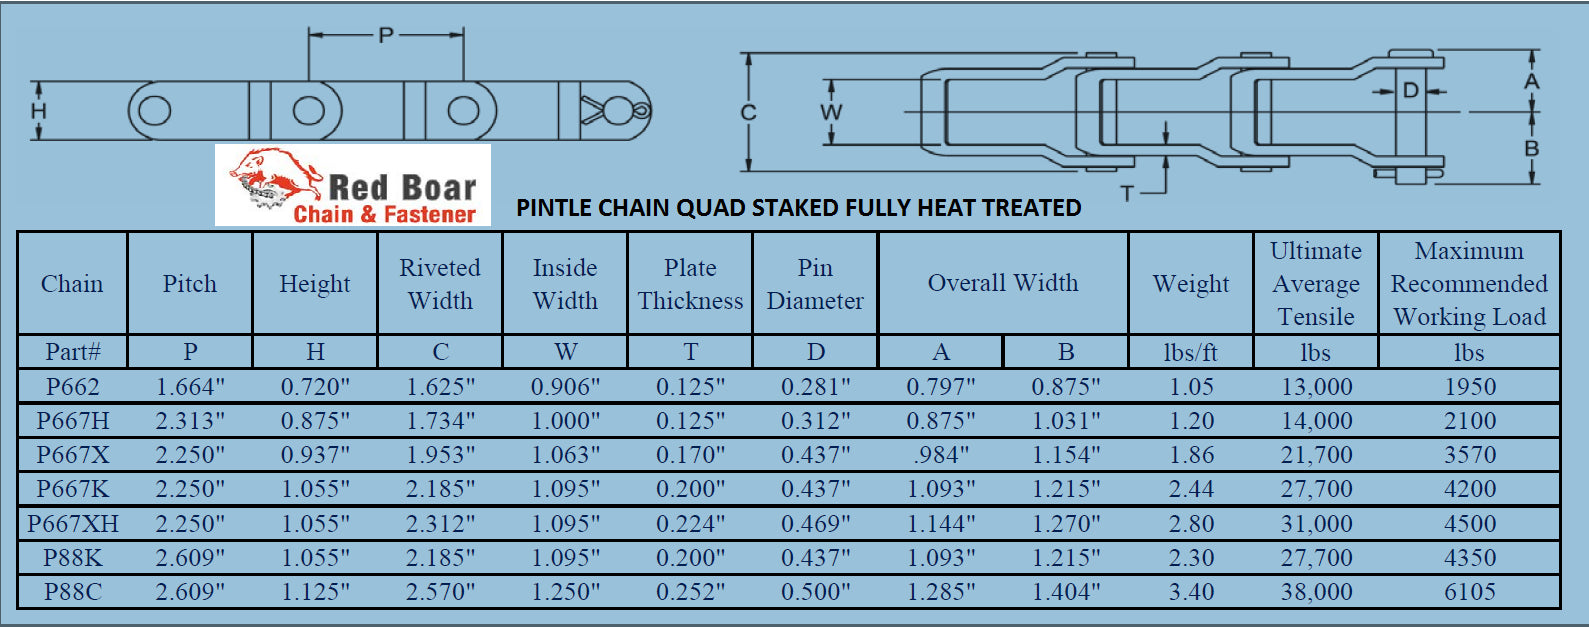 667H Pintle Chain 2.31" Pitch Spec